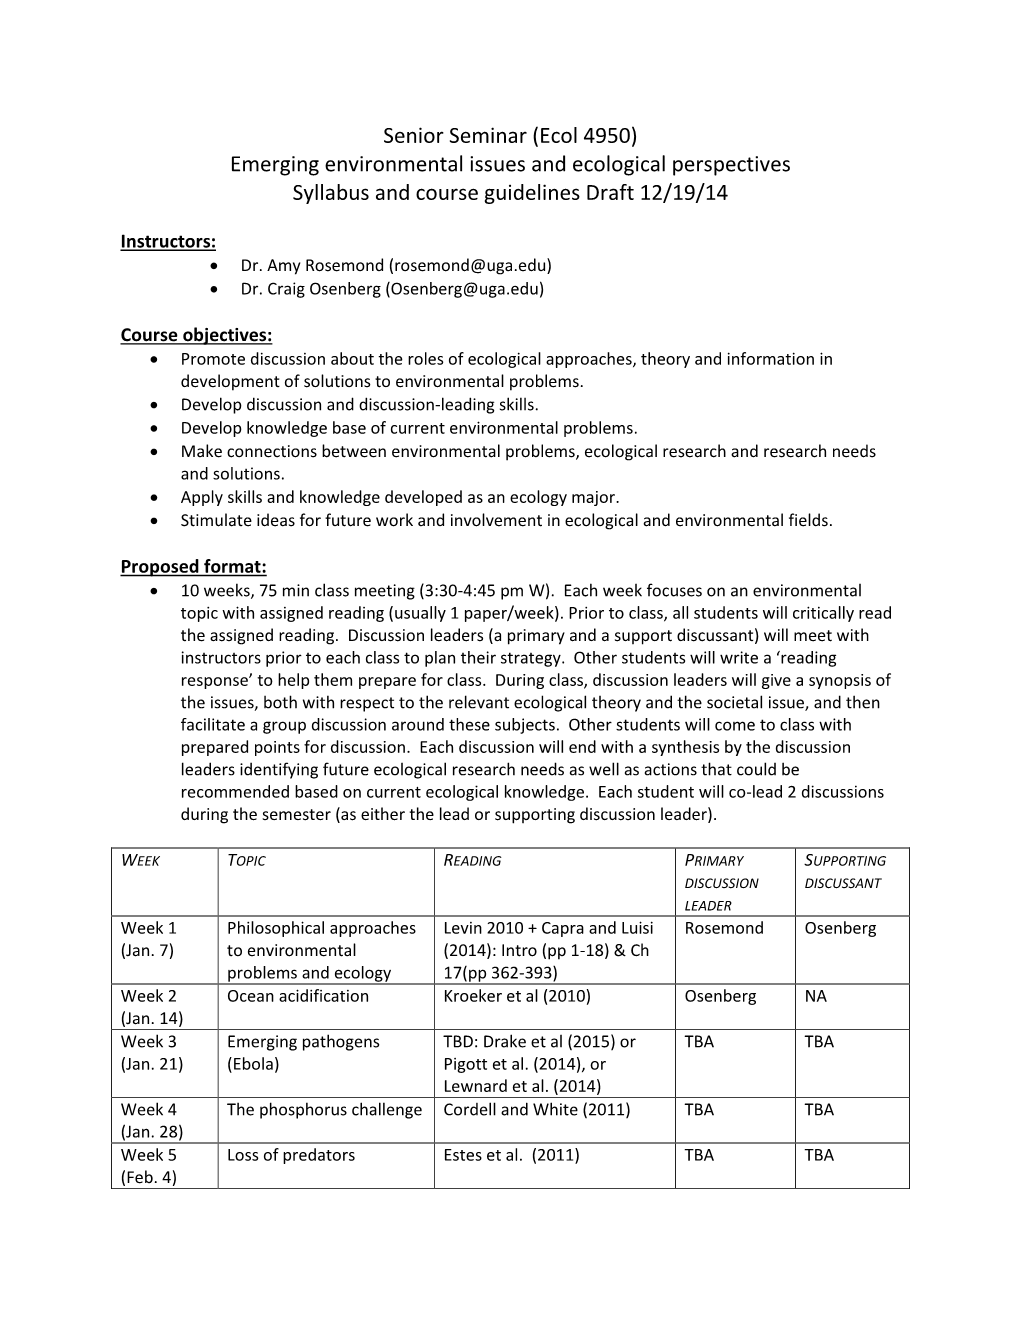 Senior Seminar (Ecol 4950) Emerging Environmental Issues and Ecological Perspectives Syllabus and Course Guidelines Draft 12/19/14